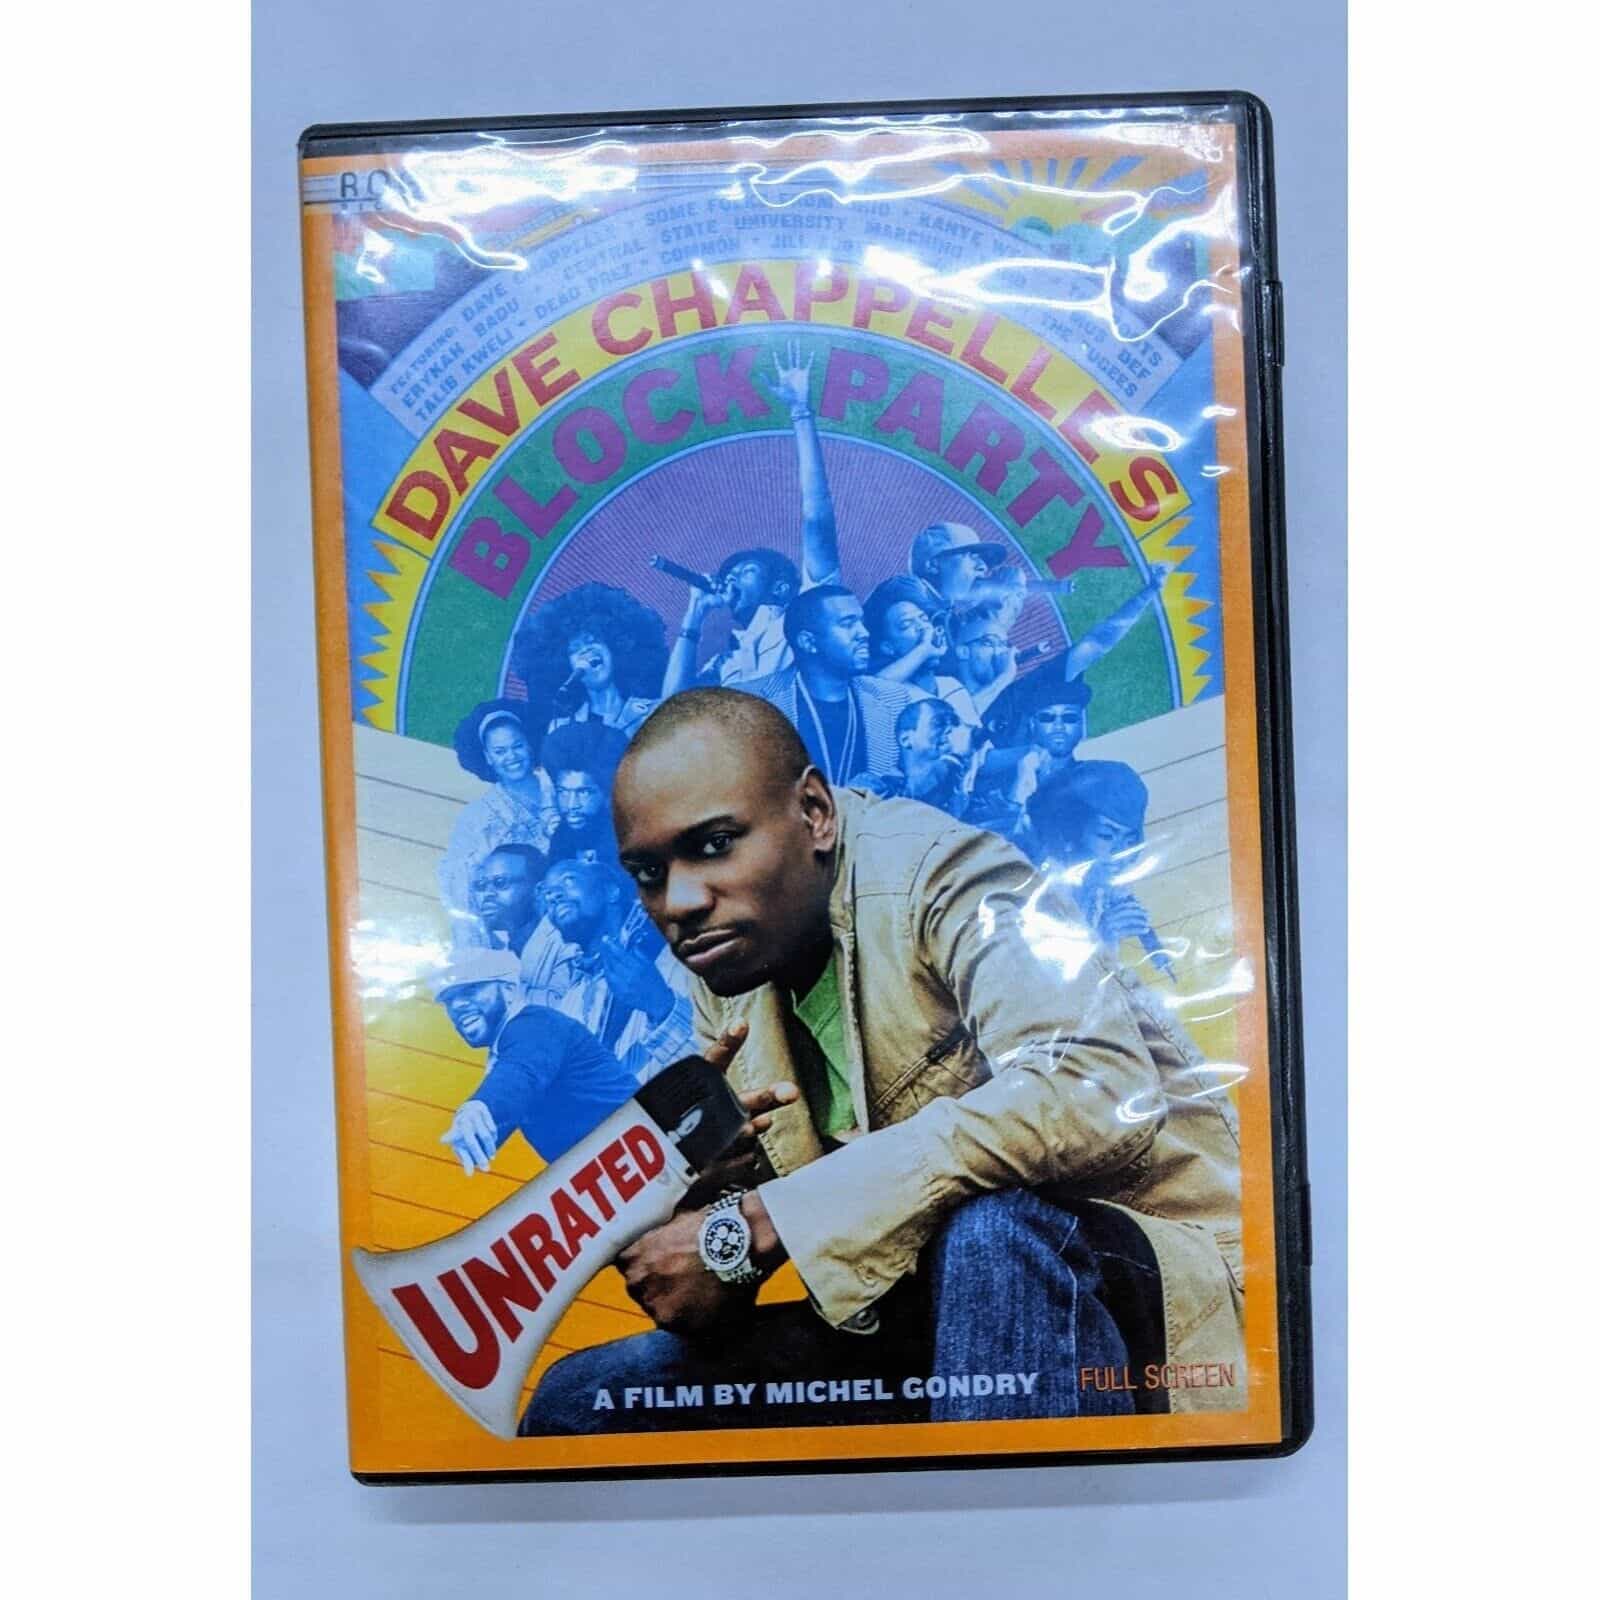 Dave Chapelle’s Block Party DVD movie – Unrated Edition